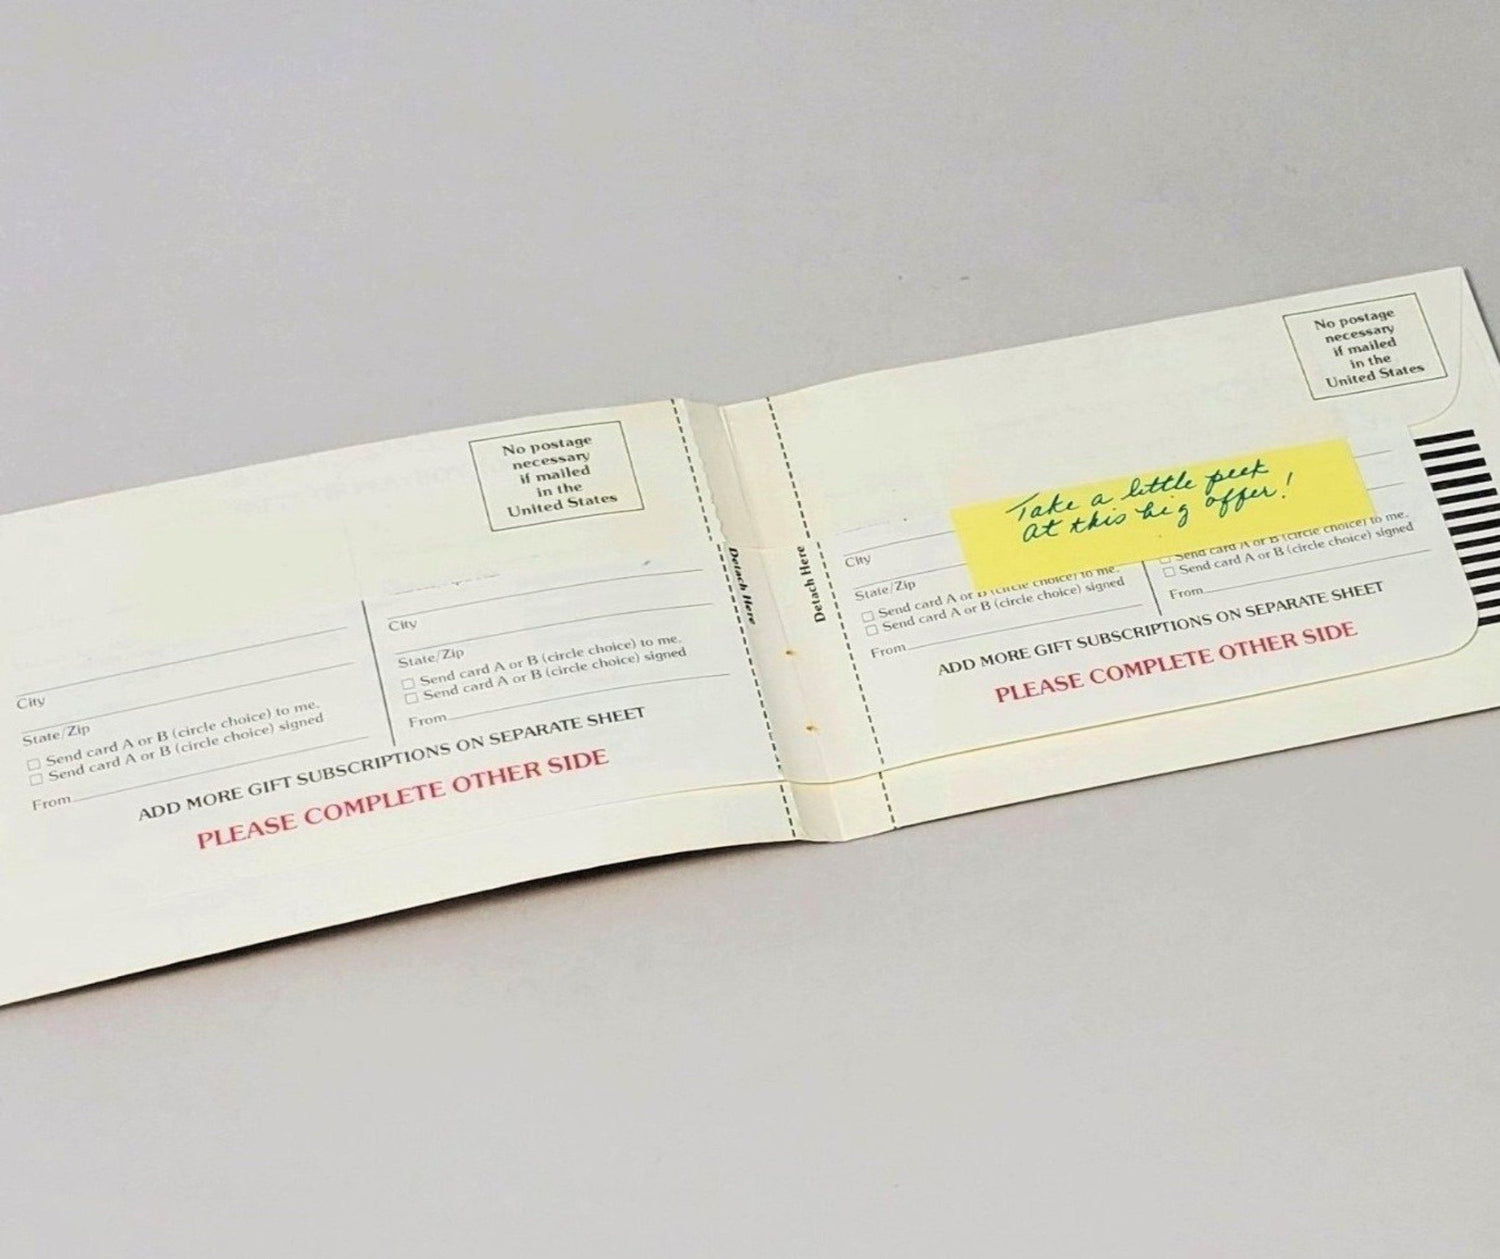 Original 1978 Playboy subscription envelope sold by area51gallery